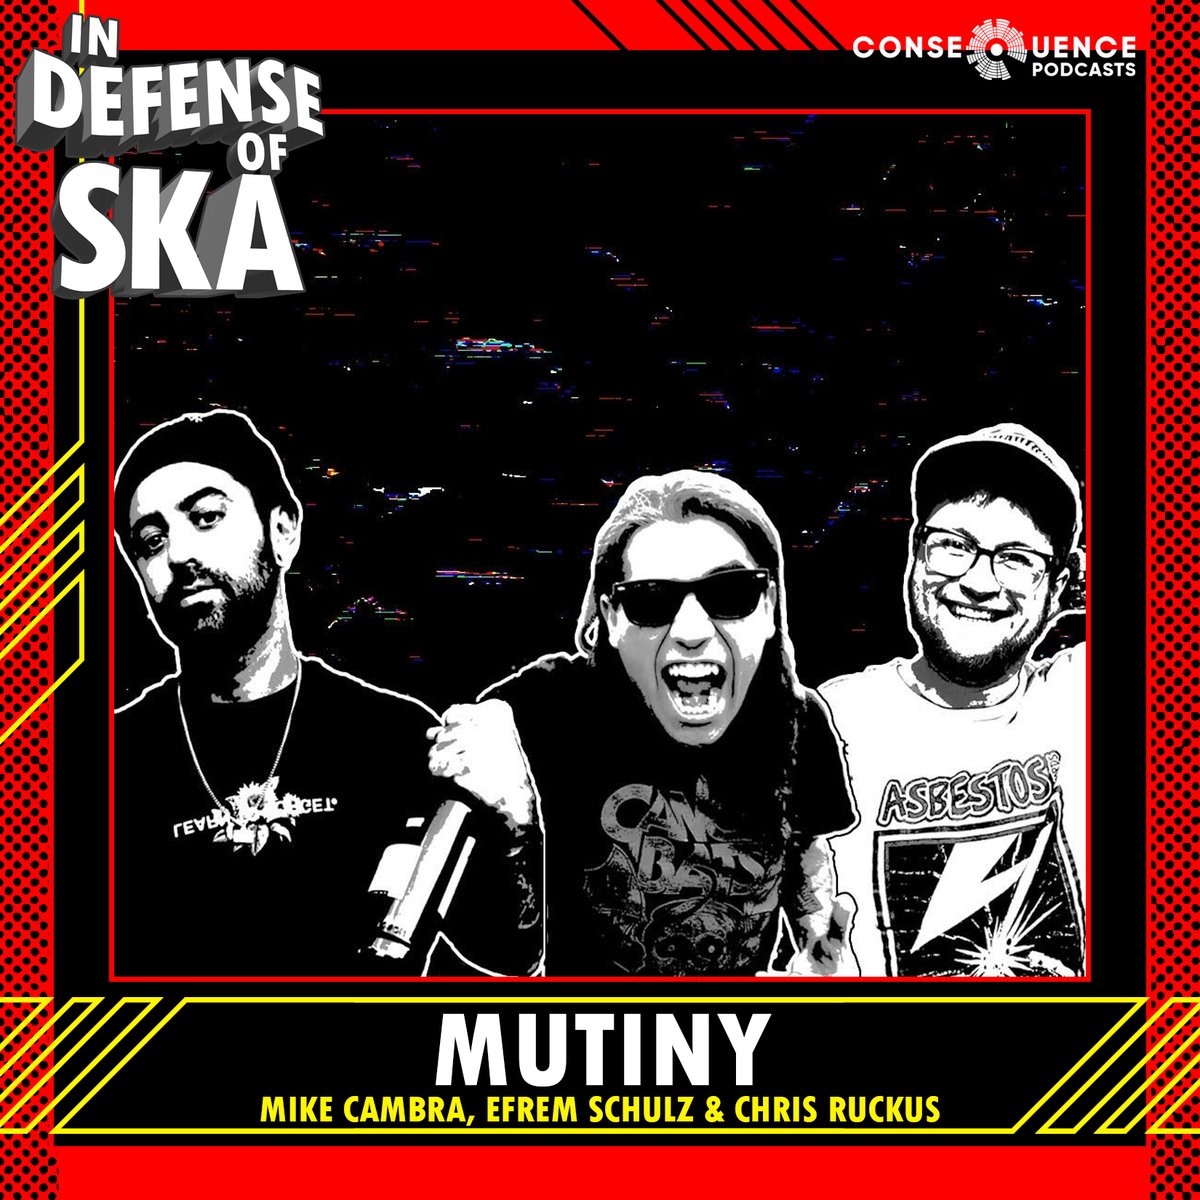 We need more ska supergroups! Fortunately, 1 of the newest, @TheBandMutiny is here. They feature members of Death By Stereo, Voodoo Glow Skulls, Adolescents, Dissidente, Manic Hispanic and MORE! We get 3 members of the band this week: Efrem, Mike and Chris! It's a superlisten!